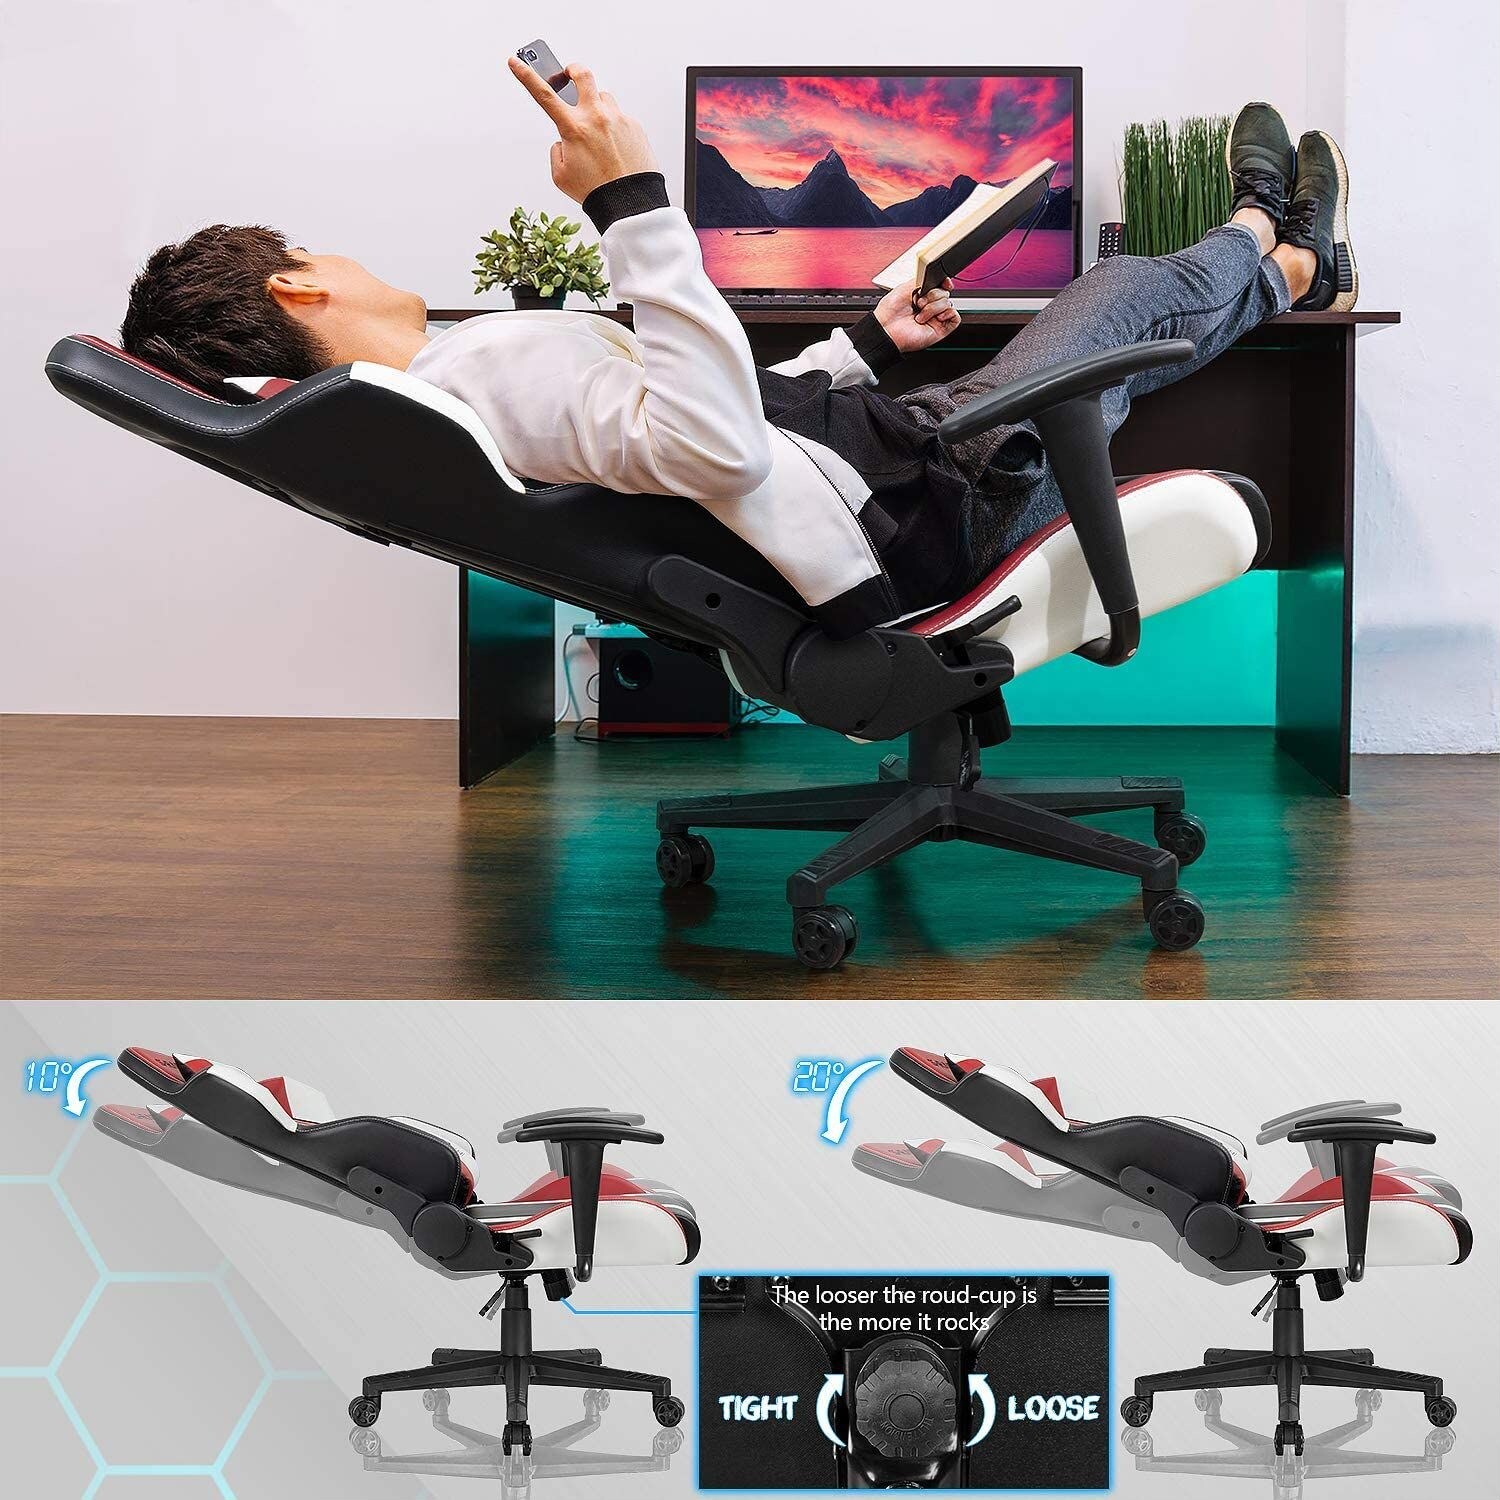 https://ak1.ostkcdn.com/images/products/is/images/direct/9f7c02ce775183319260865553e42532bd1baf48/Homall-Gaming-Chair-Racing-Style-Office-Chair-Computer-Desk-Chair.jpg